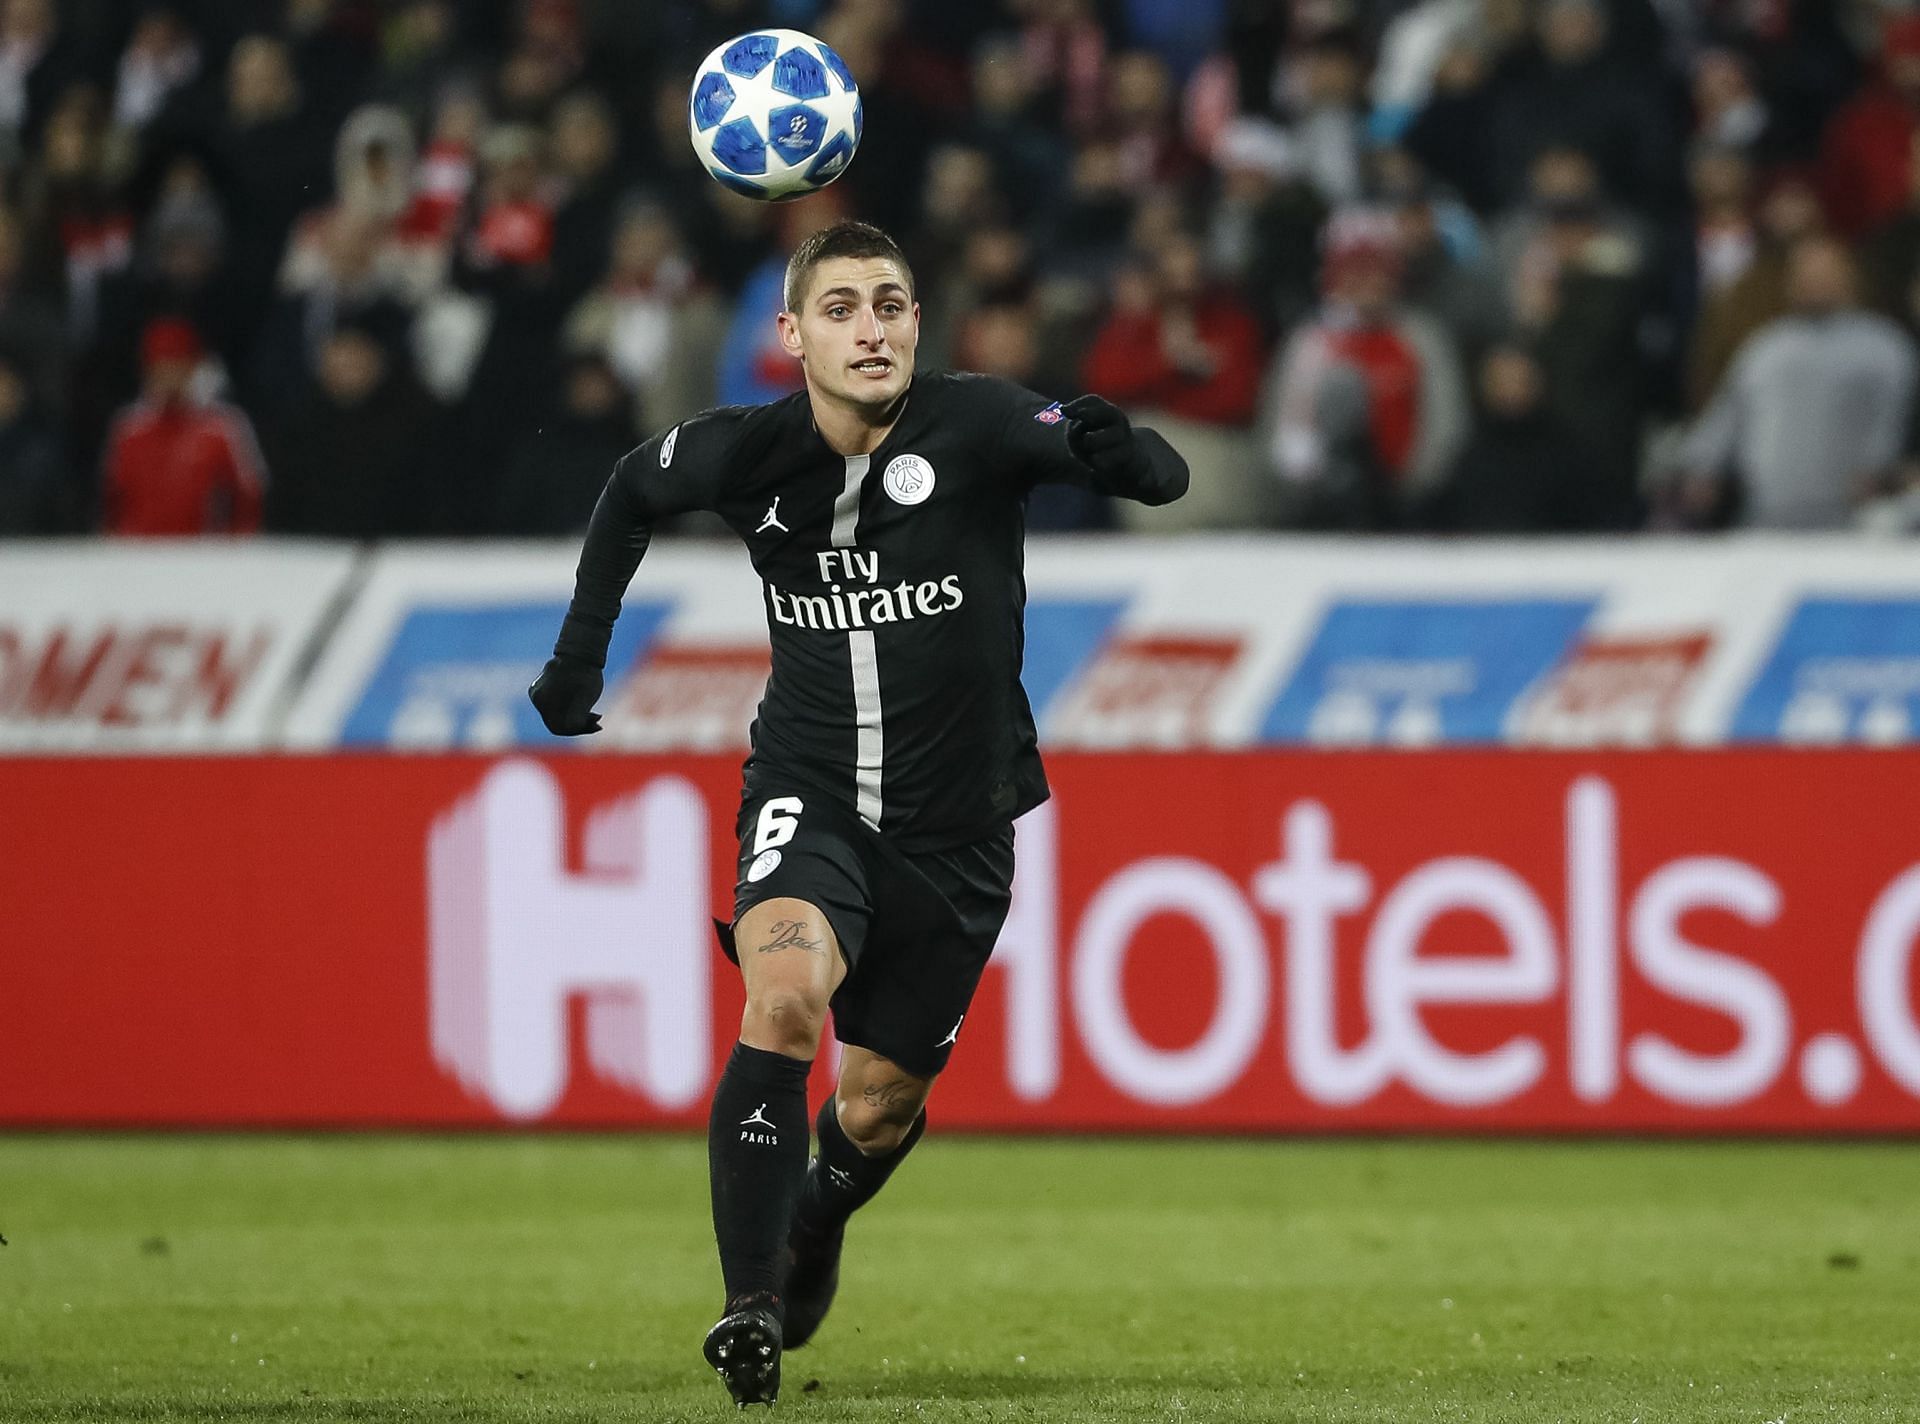 Verratti is the most decorated PSG player